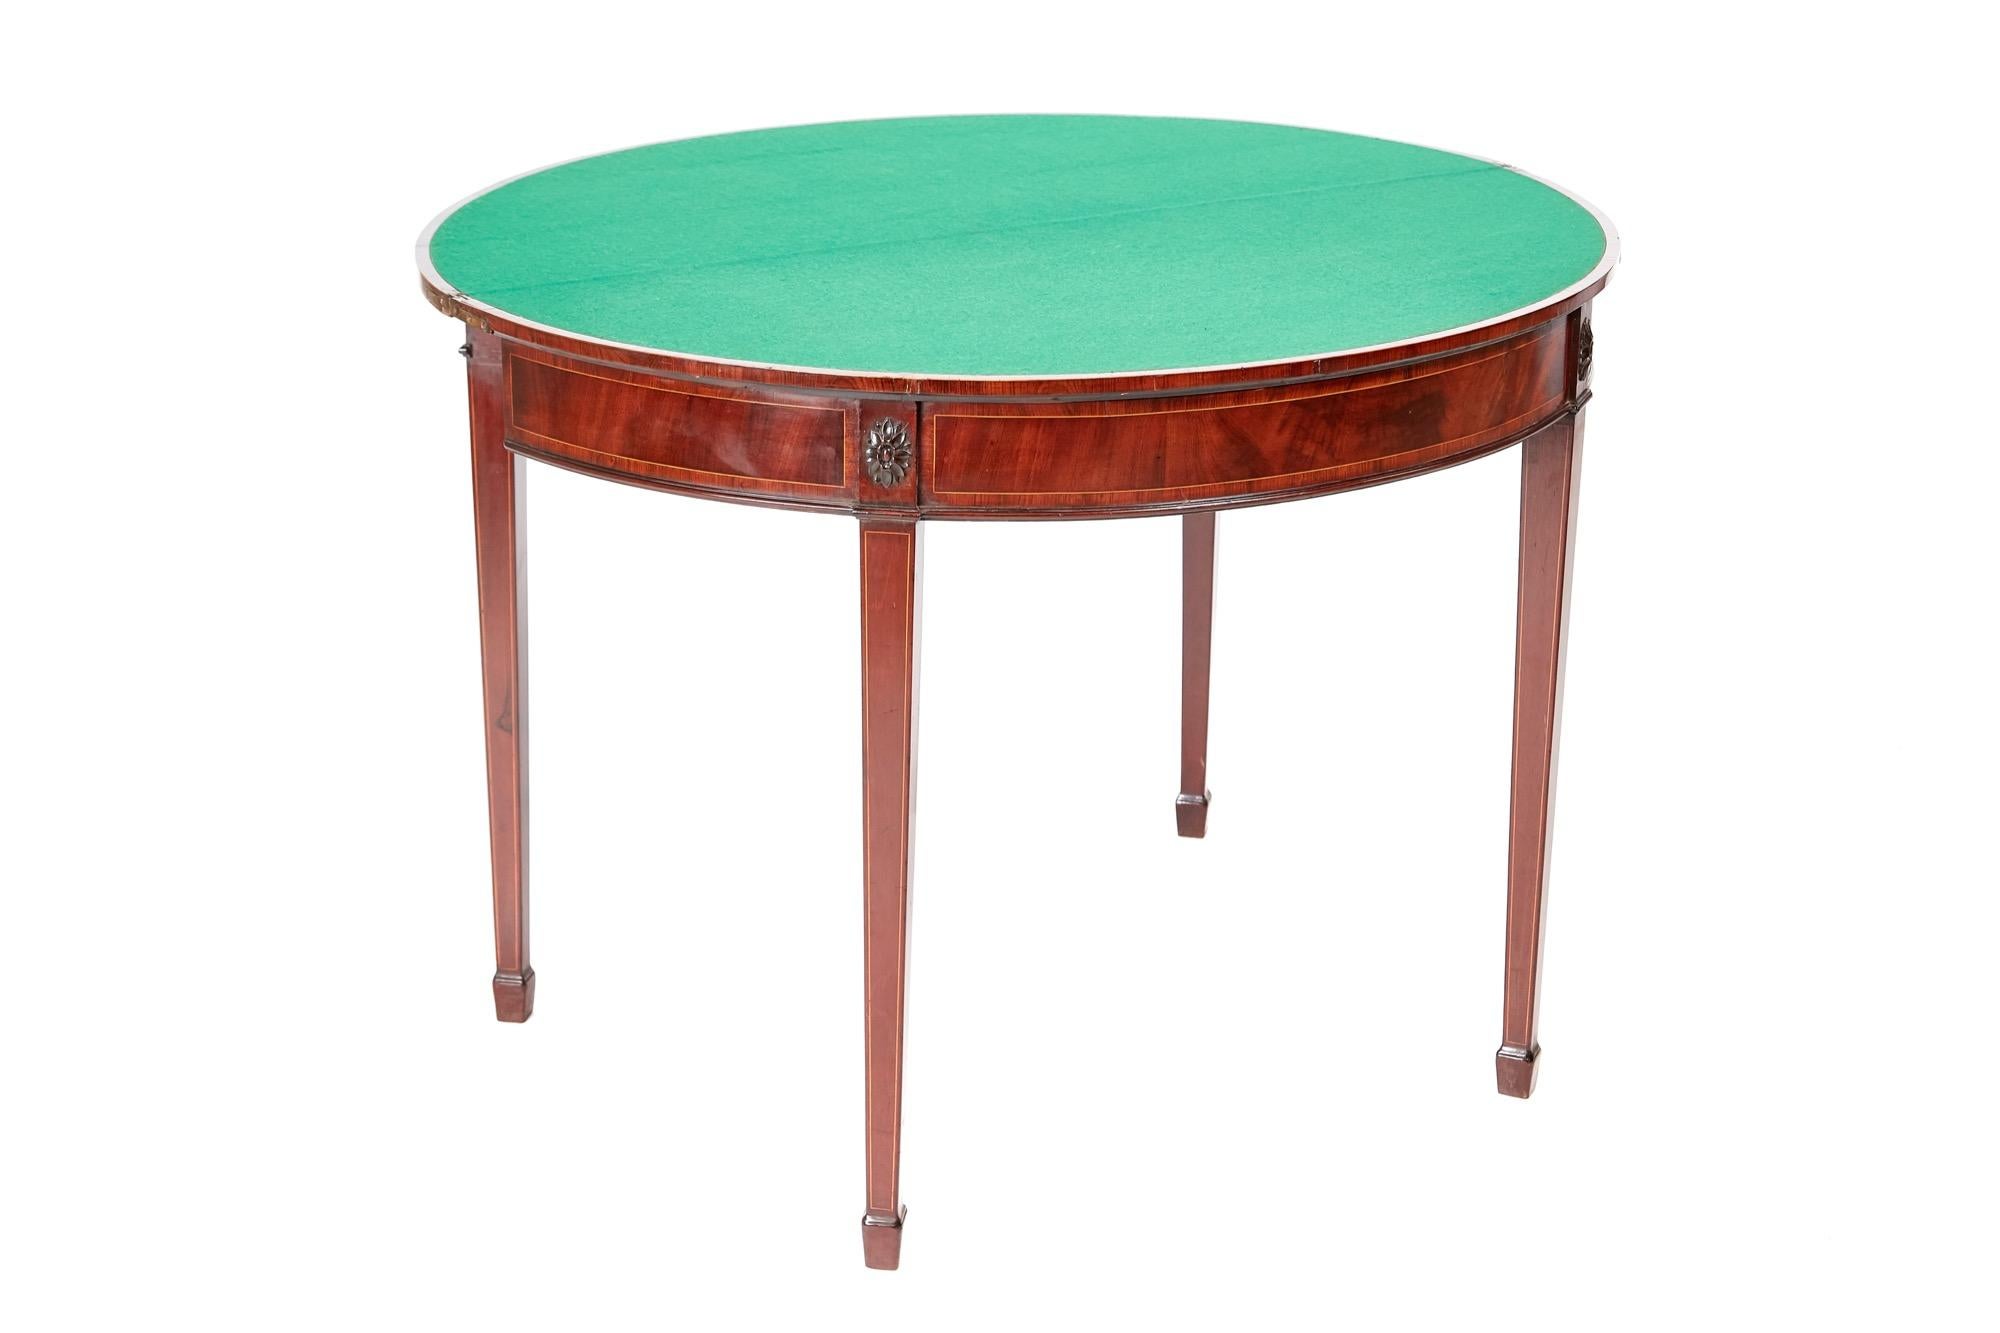 George III Mahogany demilune card table, having a lovely mahogany top crossbanded in satinwood, green baize interior, mahogany frieze crossbanded in satinwood, standing on four inlaid square tapering legs with spade feet,
Lovely color and